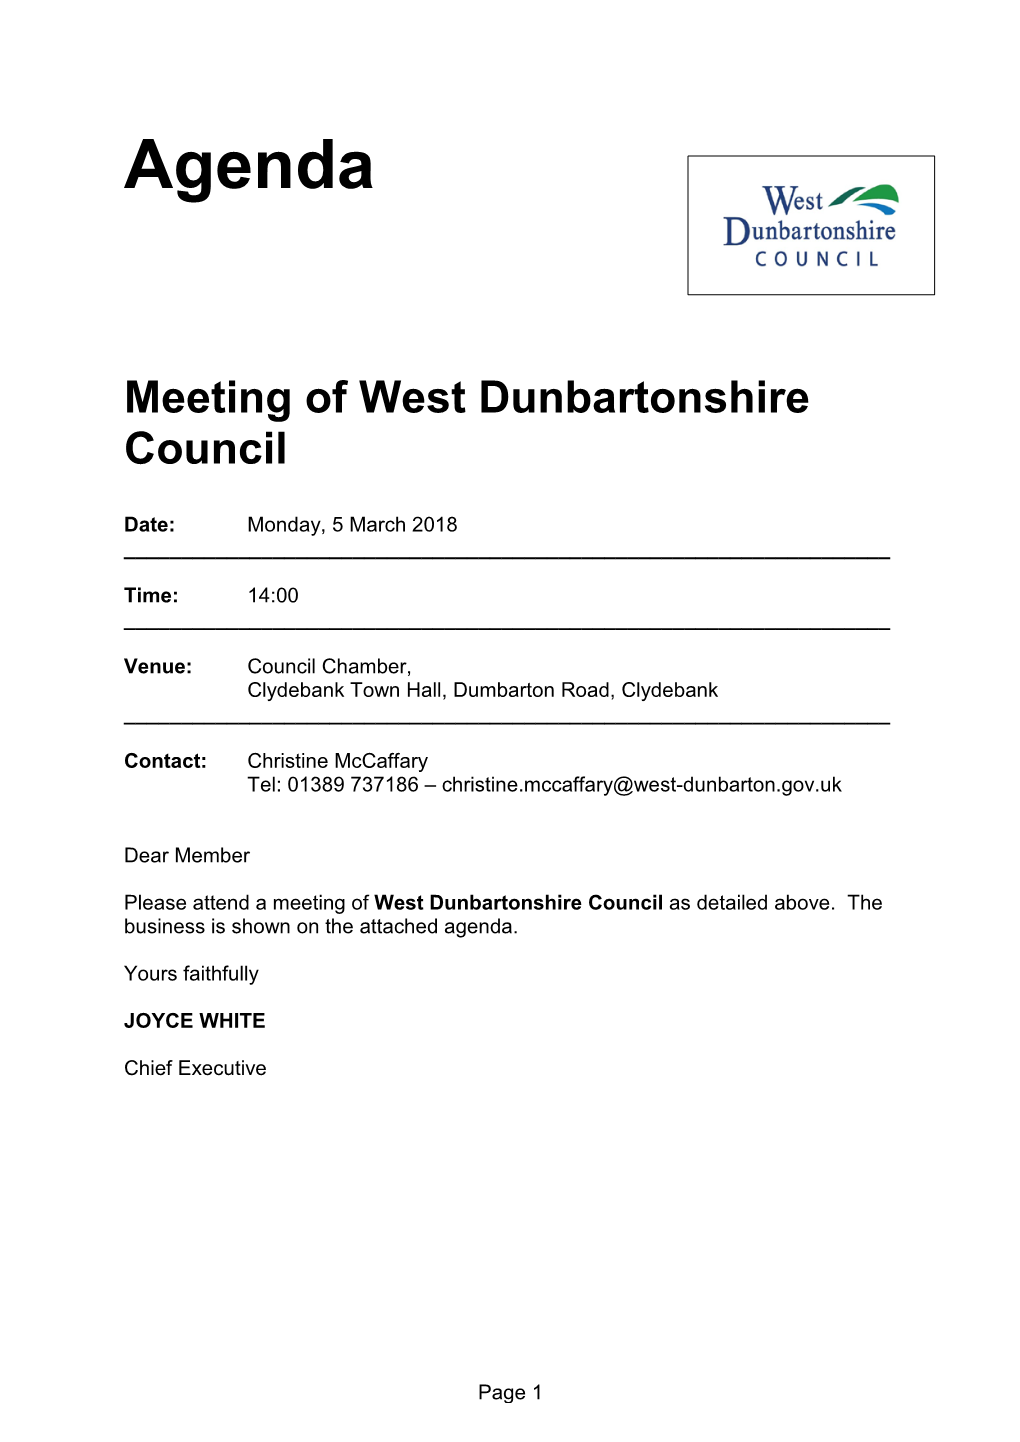 Meeting of West Dunbartonshire Council